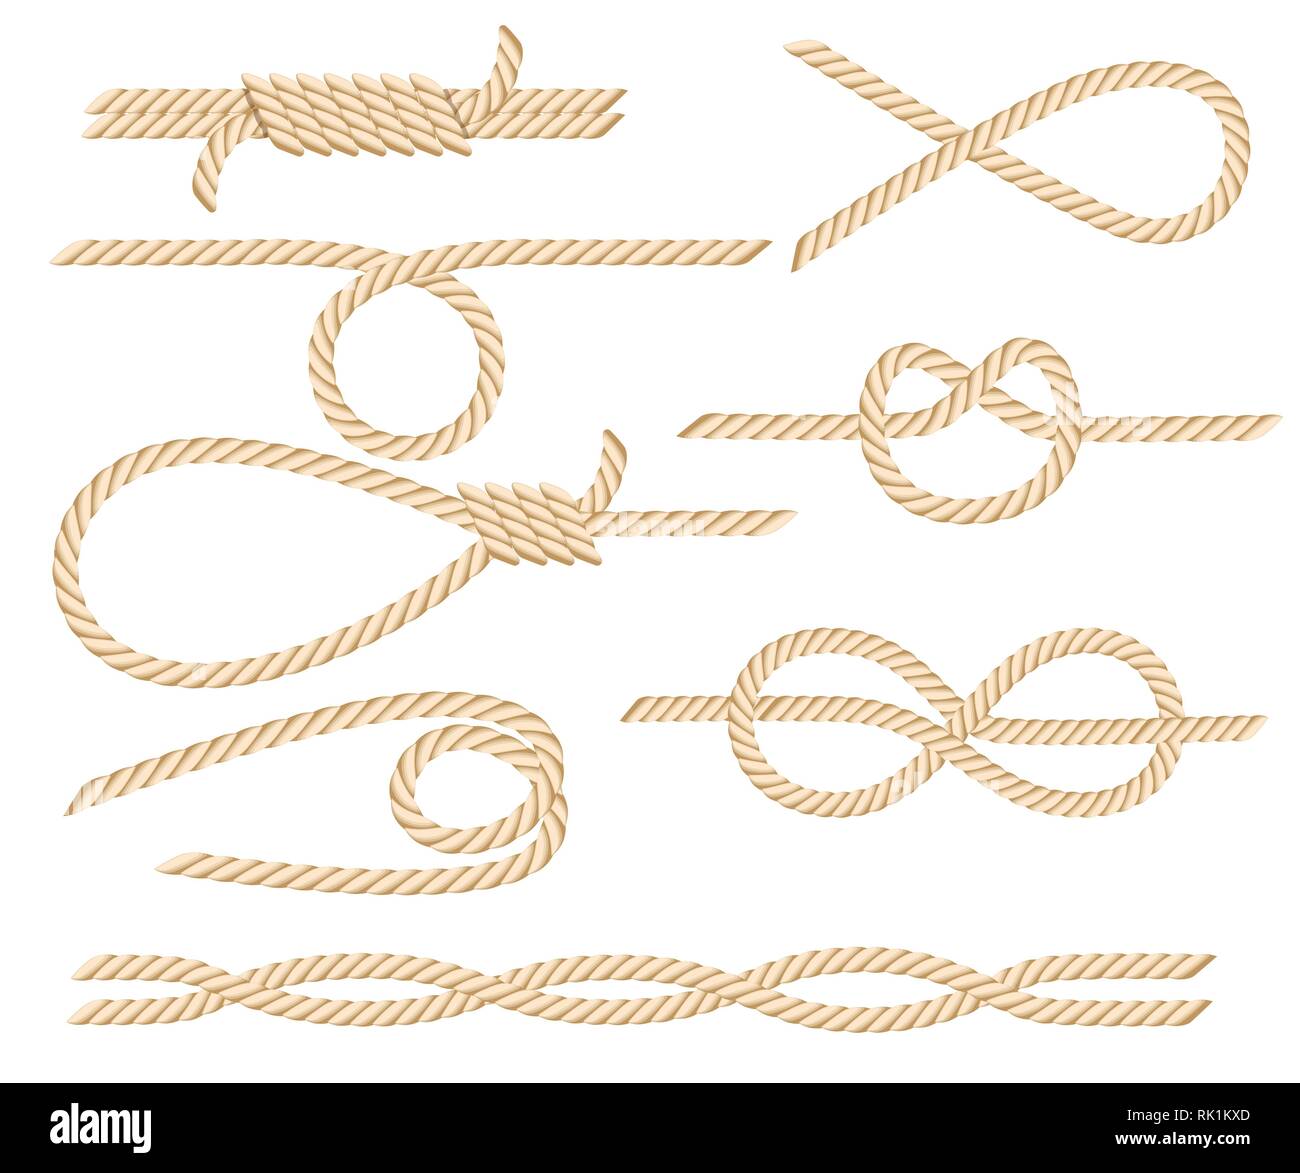 Set of nautical rope knots. Yellow rope. Strong marine rope knots. Flat vector illustration isolated on white background. Stock Vector